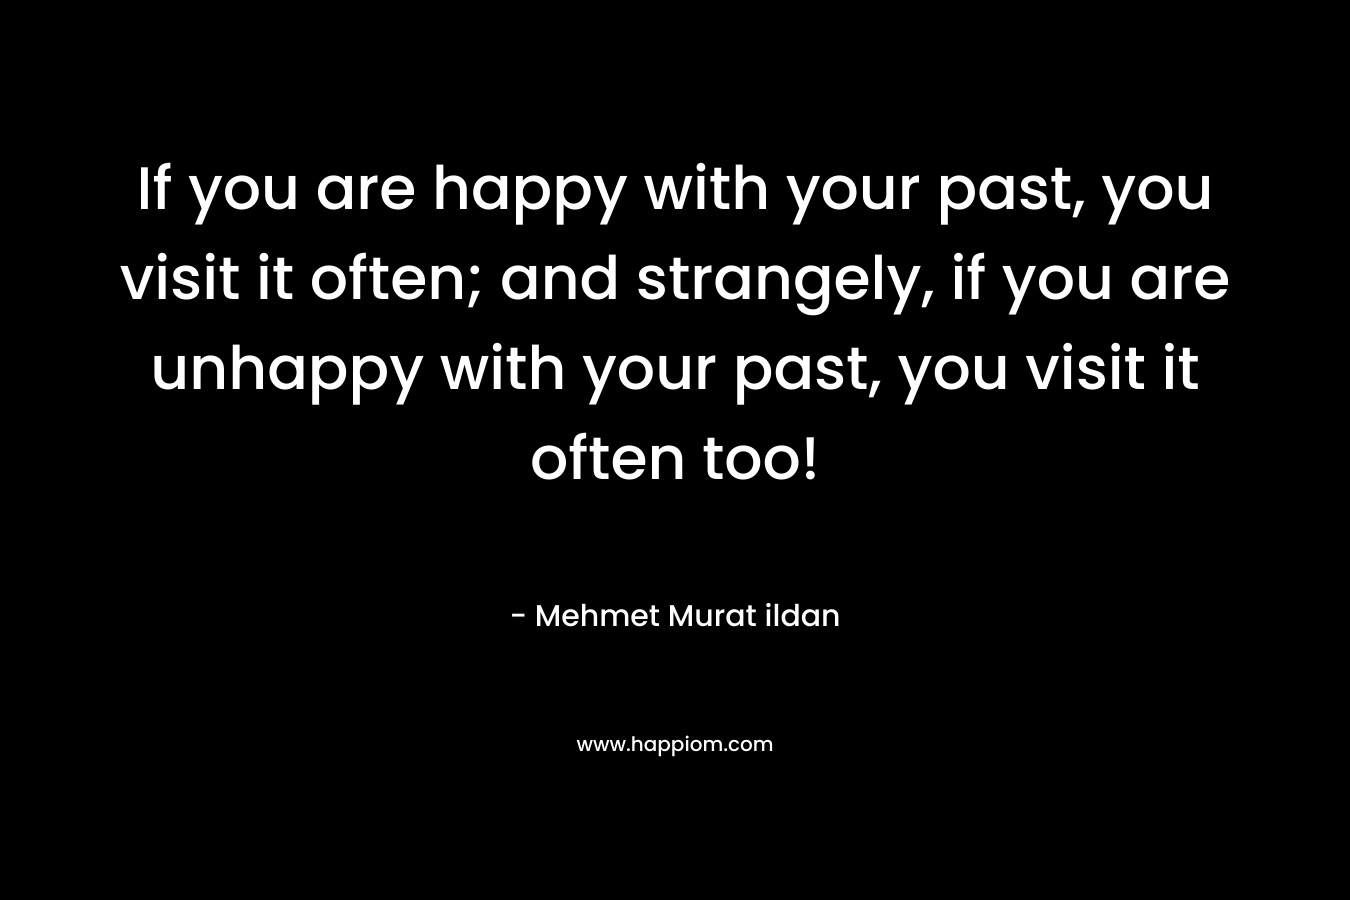 If you are happy with your past, you visit it often; and strangely, if you are unhappy with your past, you visit it often too!